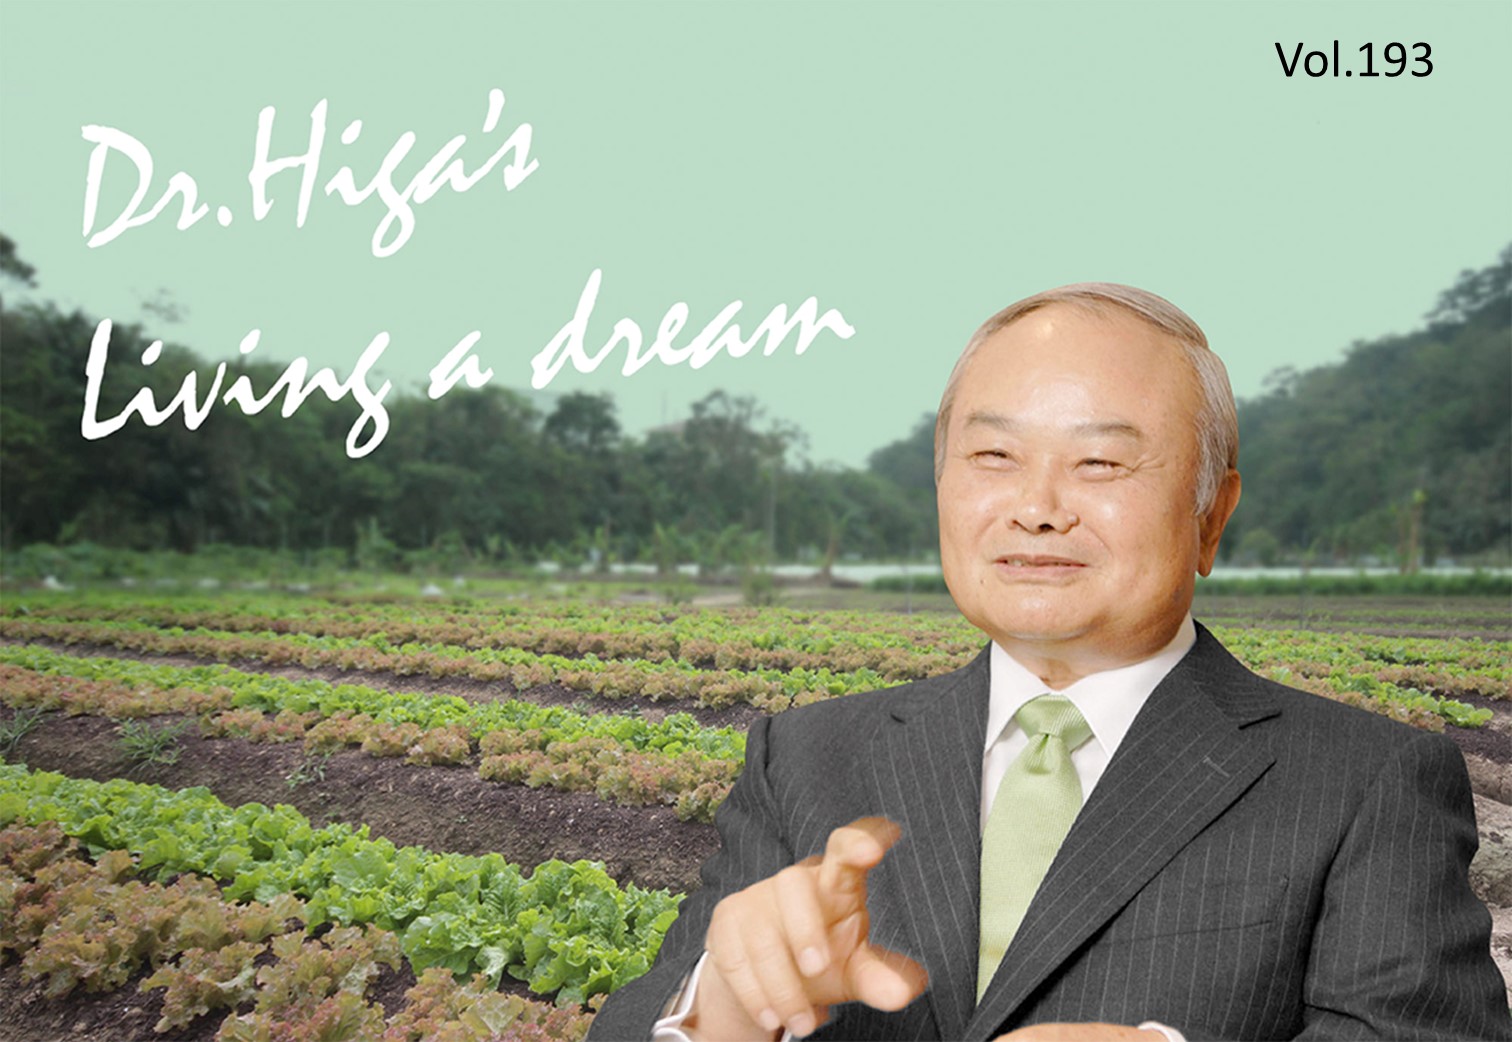 Dr. Higa's "Living a Dream": the latest articles #192 and #193 are up!!!